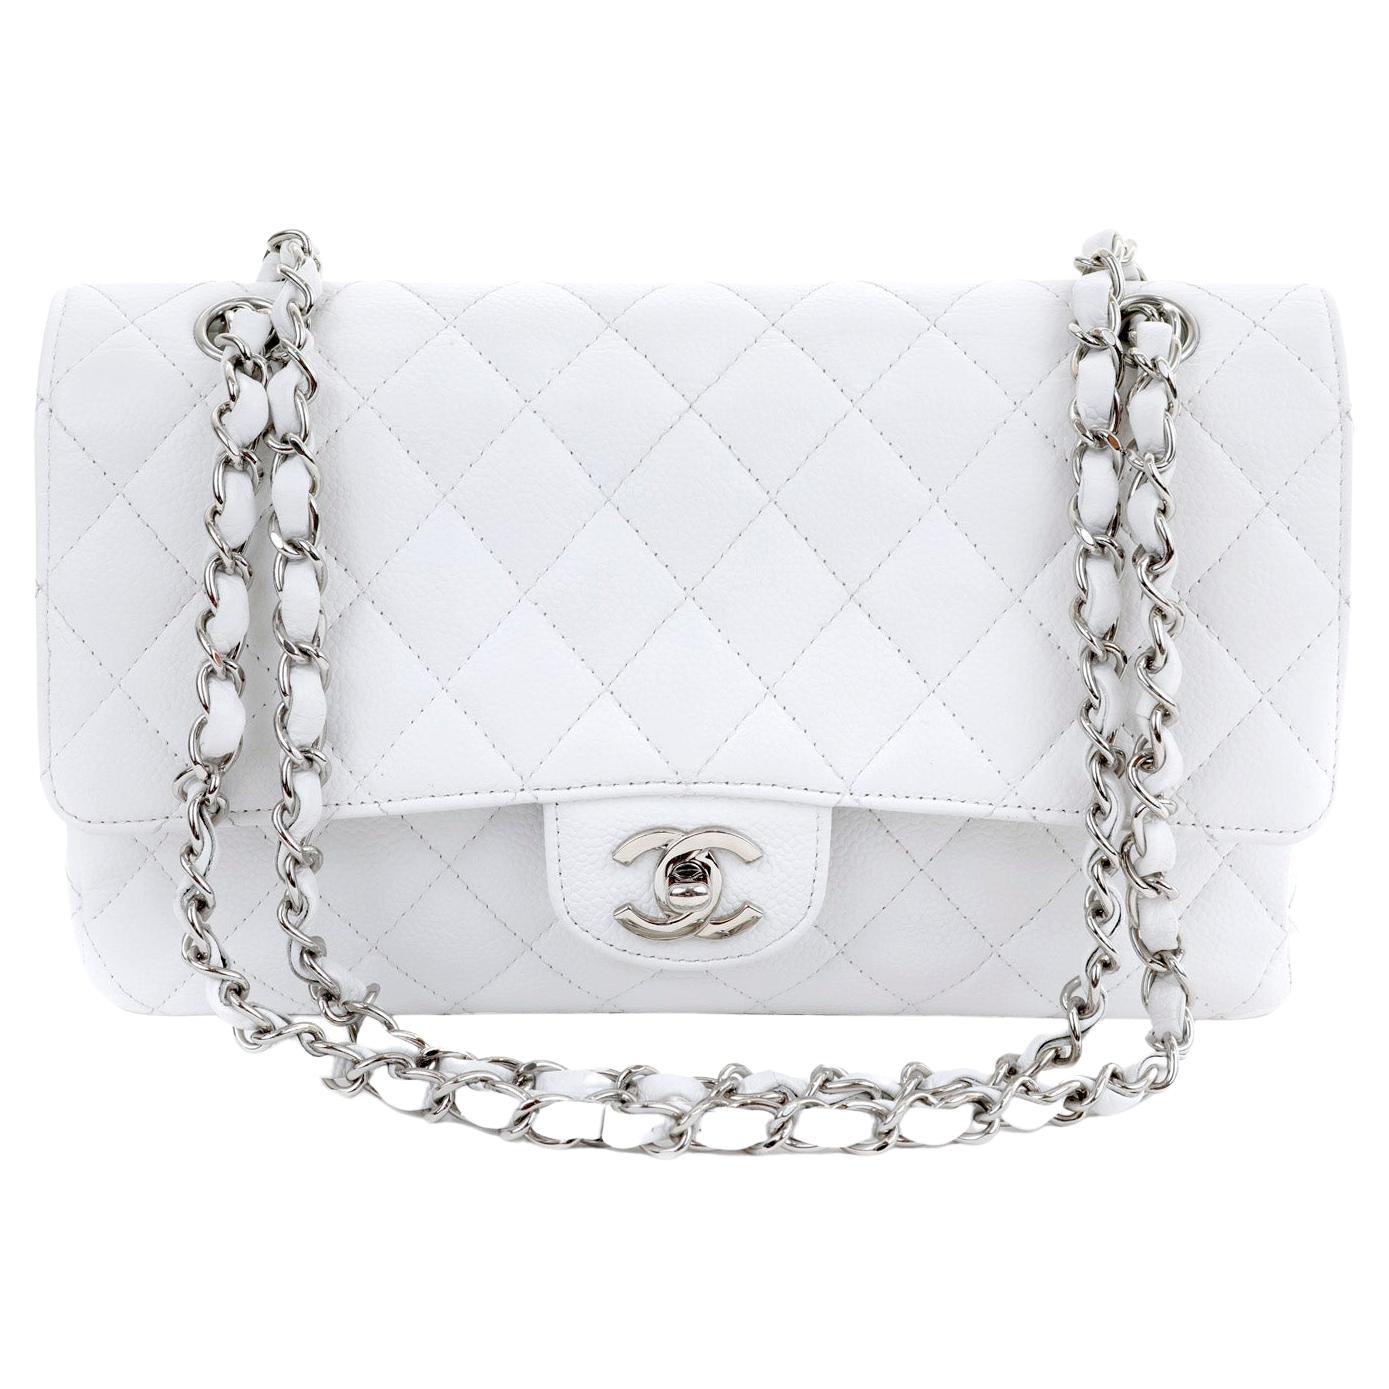 Chanel White Caviar Leather Medium Classic Flap Bag with Silver